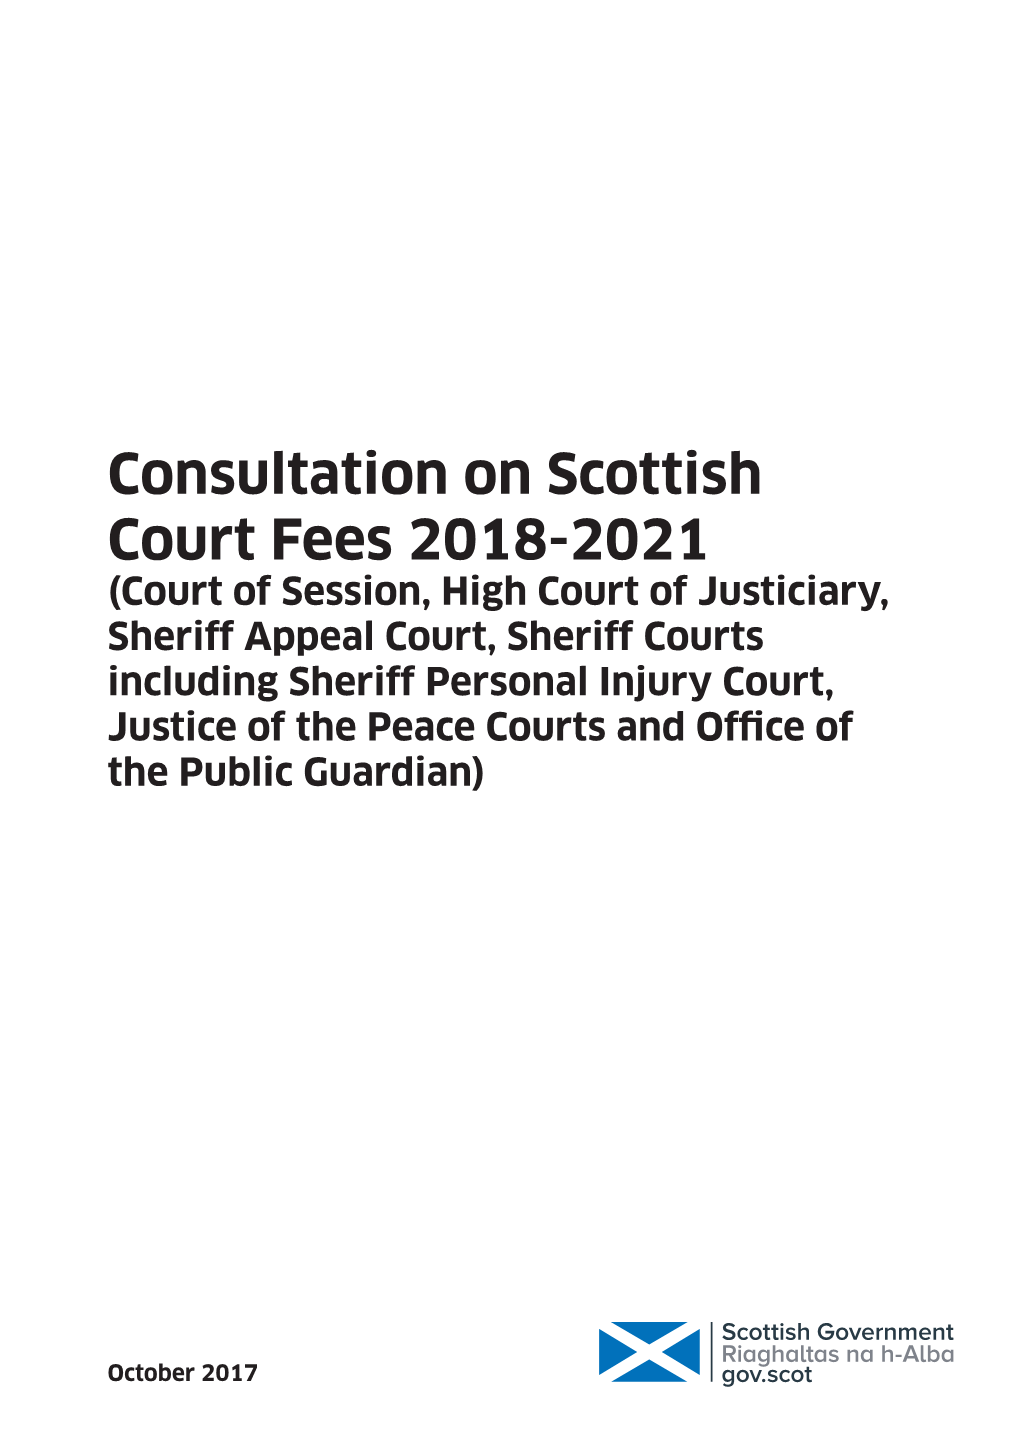 Consultation on Scottish Court Fees 2018-2021 (Court of Session, High Court of Justiciary, Sheriff Appeal Court, Sheriff Courts